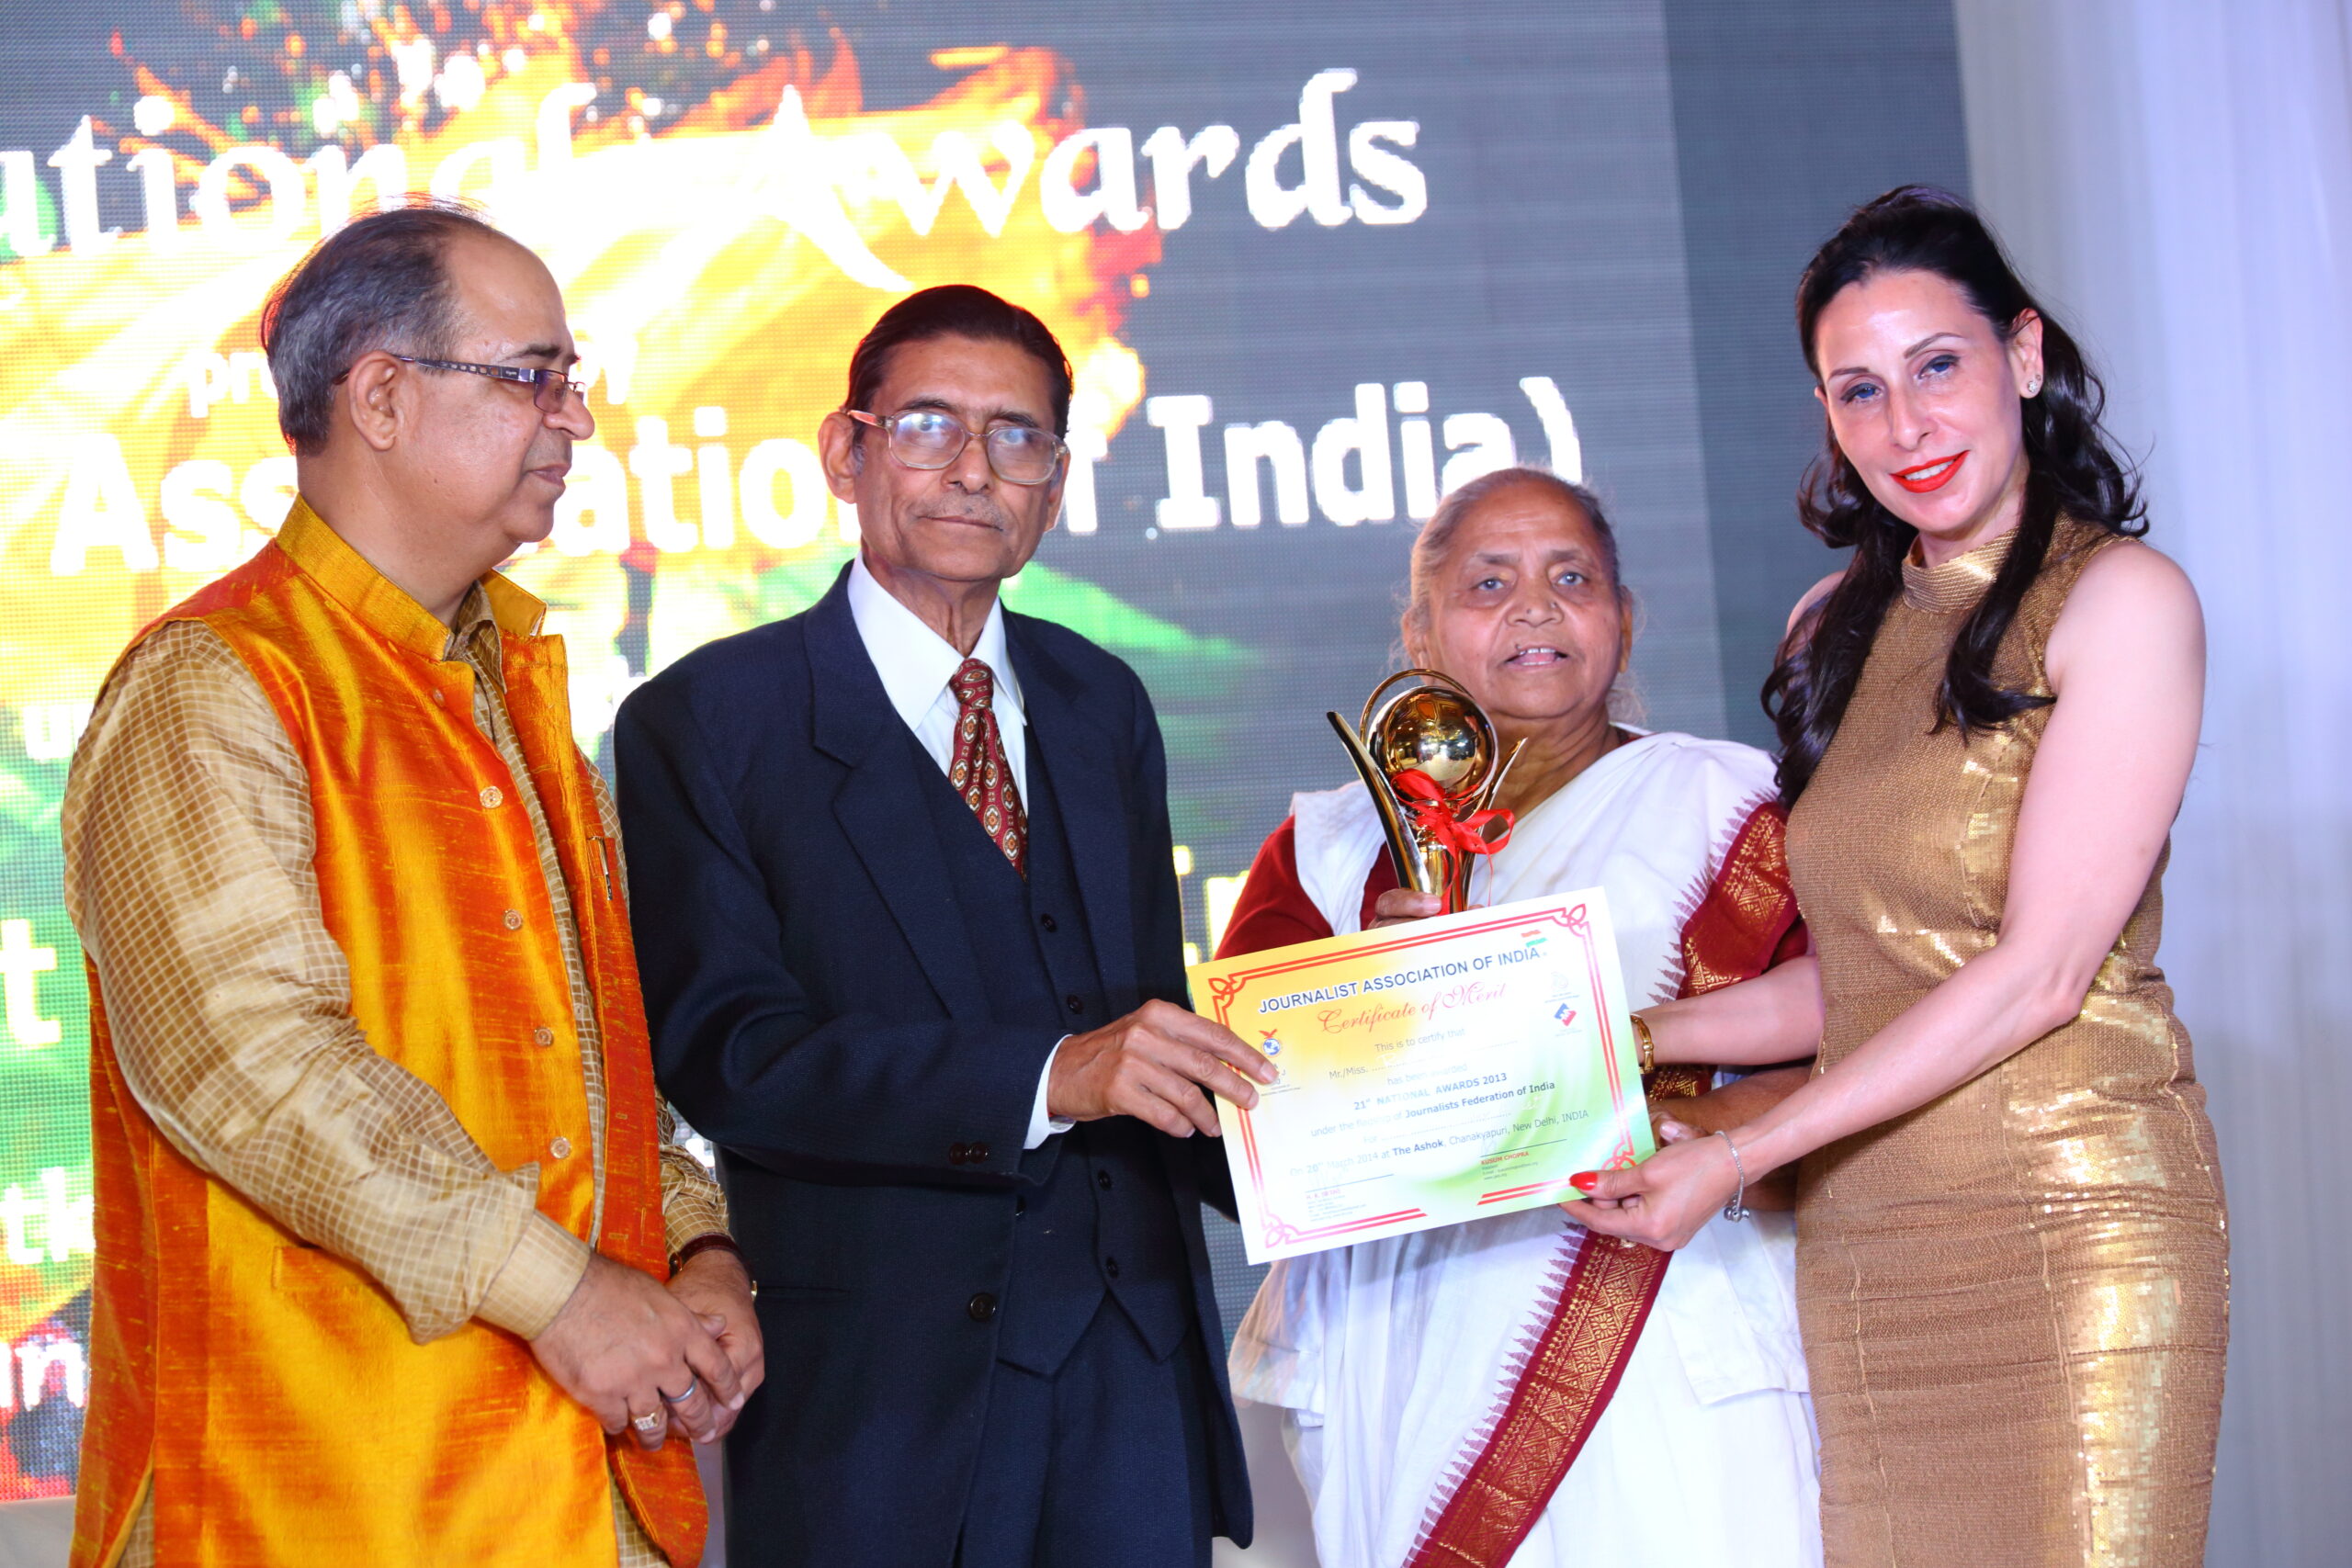  H K Sethi: Journalist Association of India announced their Annual Awards